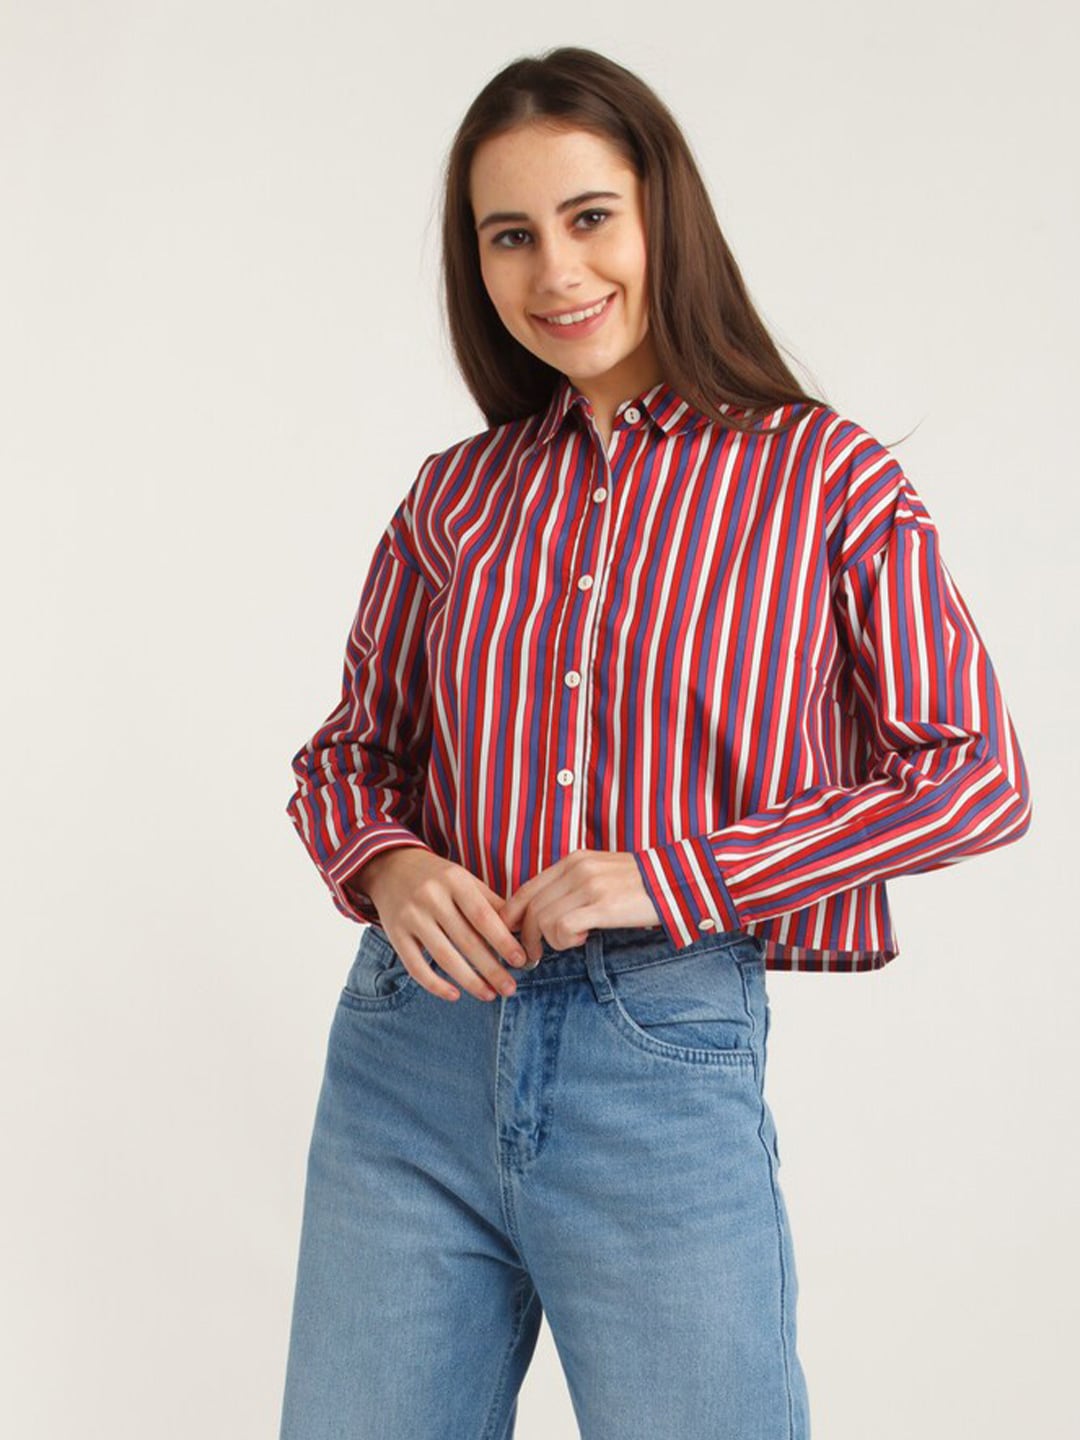 Zink London Purple Striped Shirt Style Crop Pure Cotton Top Price in India